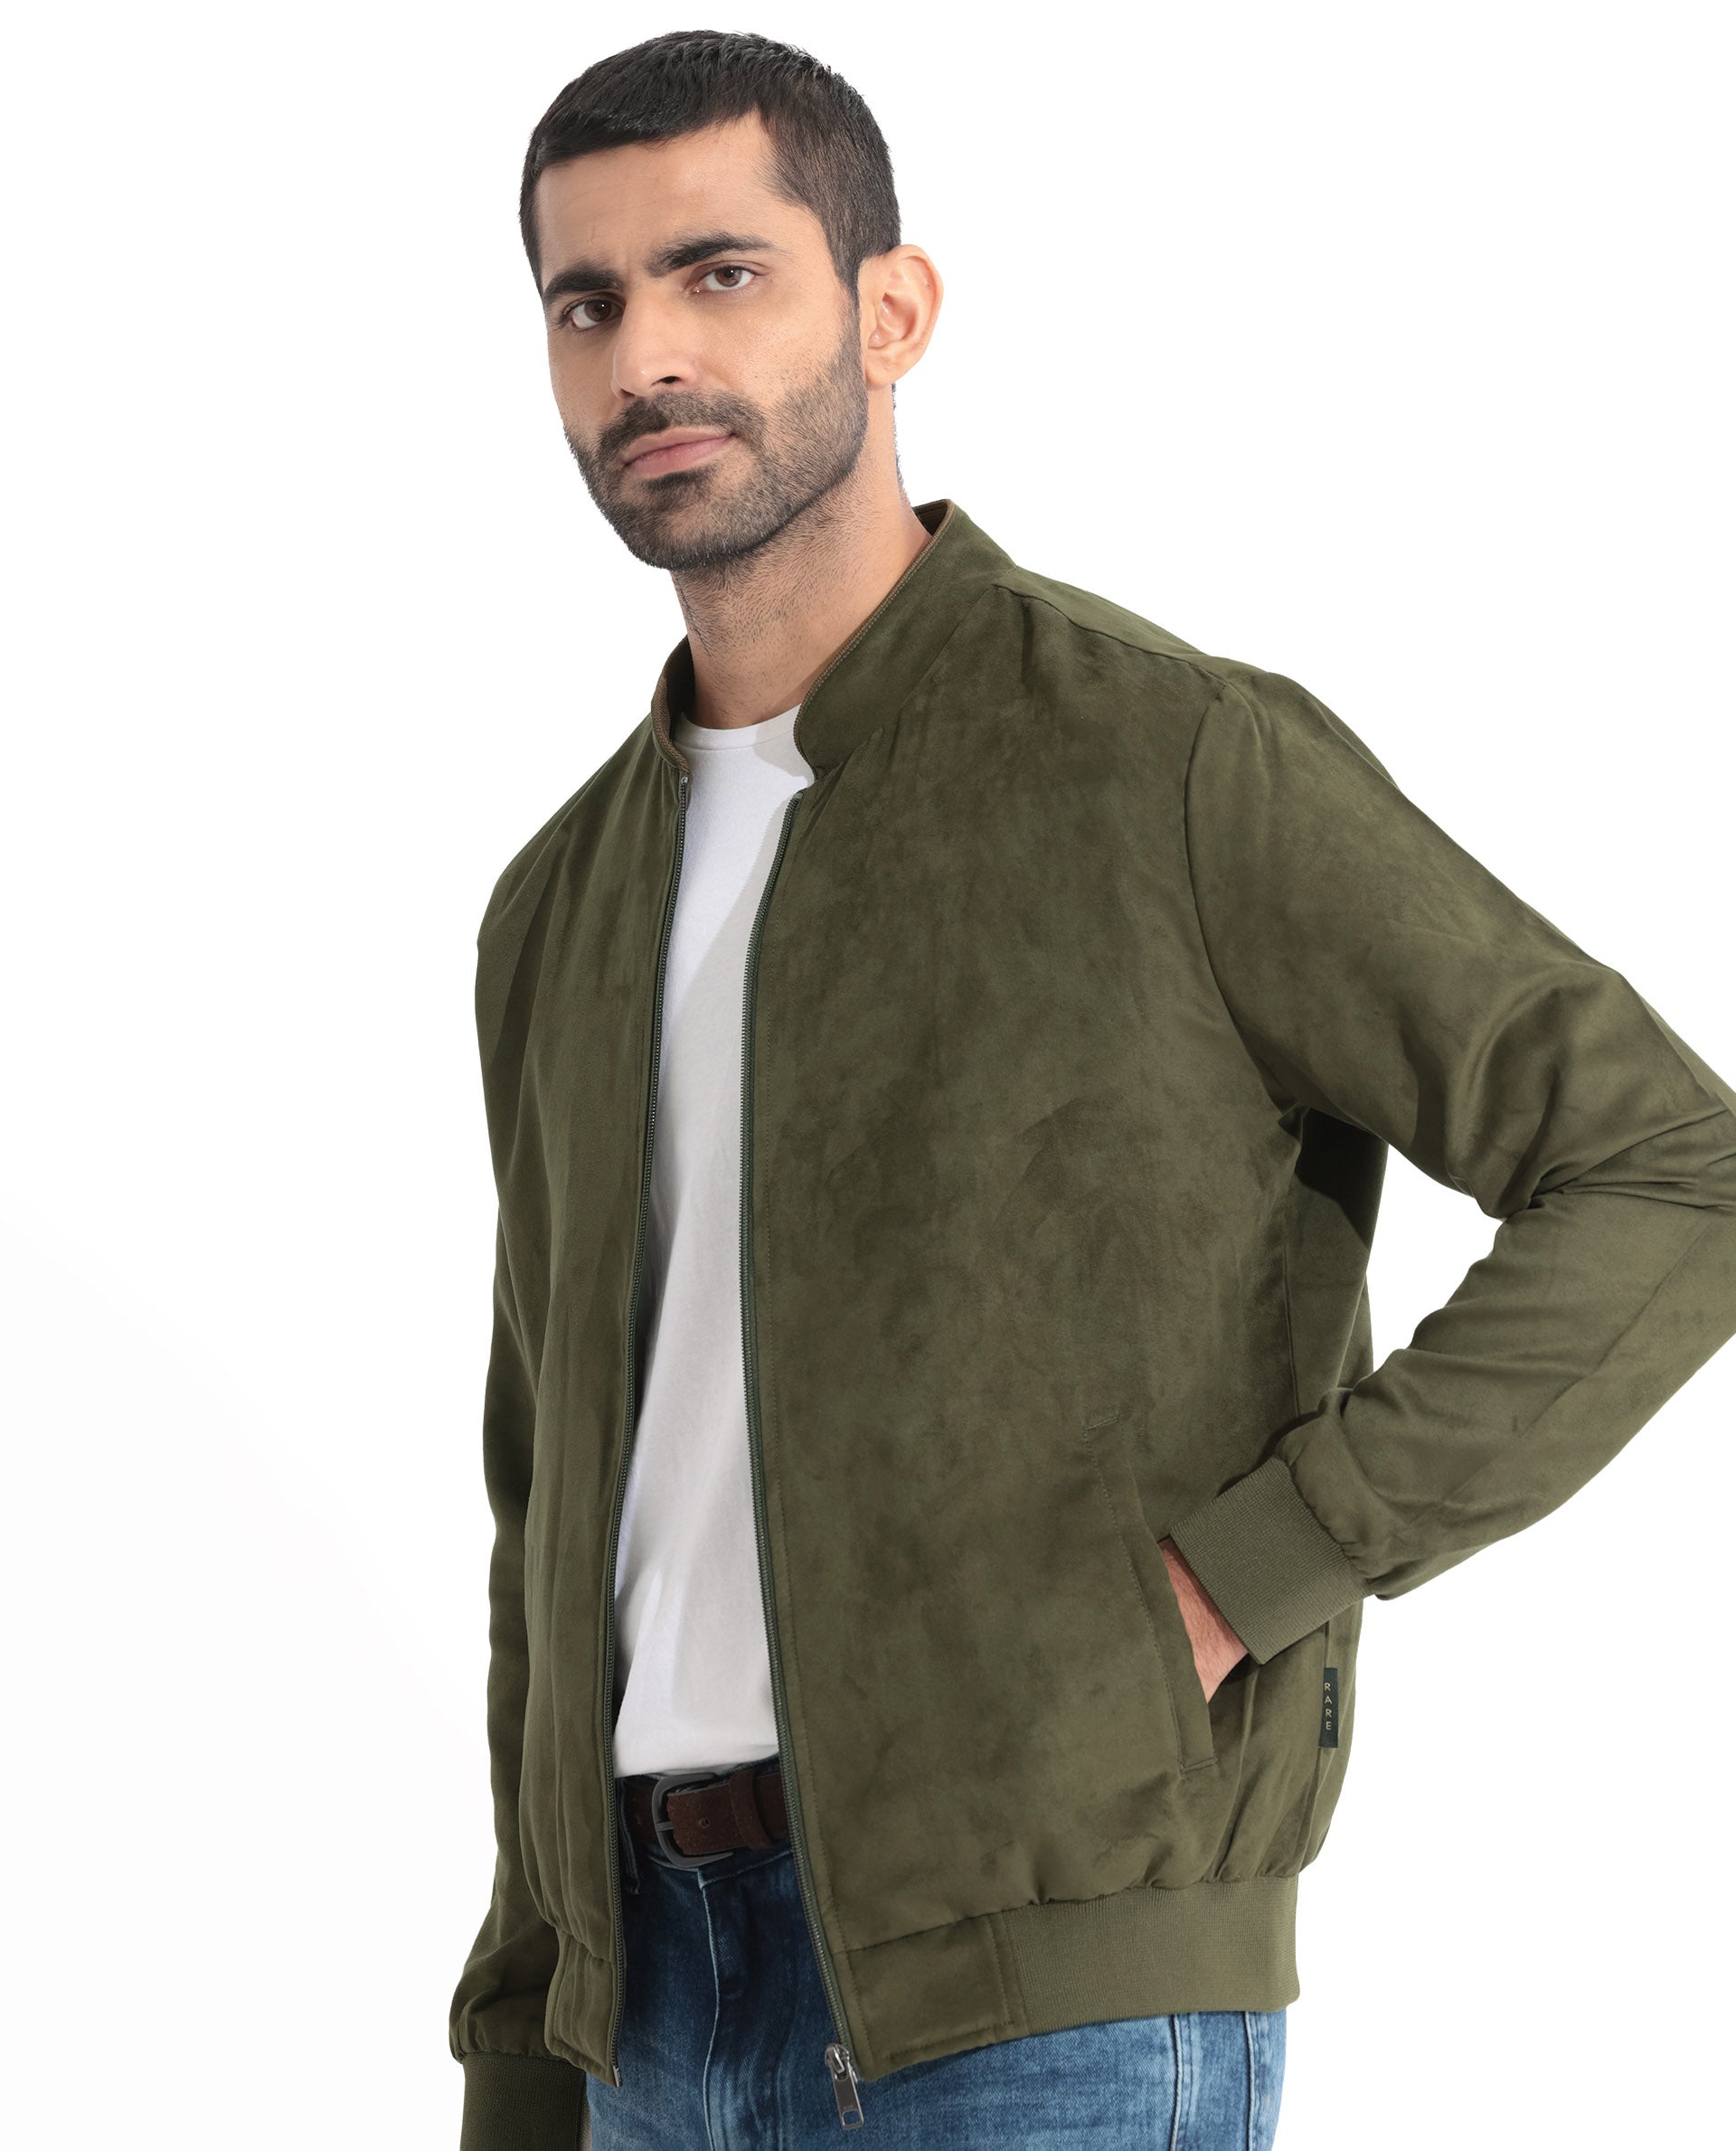 POLO RALPH LAUREN Men's Suede Bomber Jacket in Company Olive Size S Retail  $798 | eBay